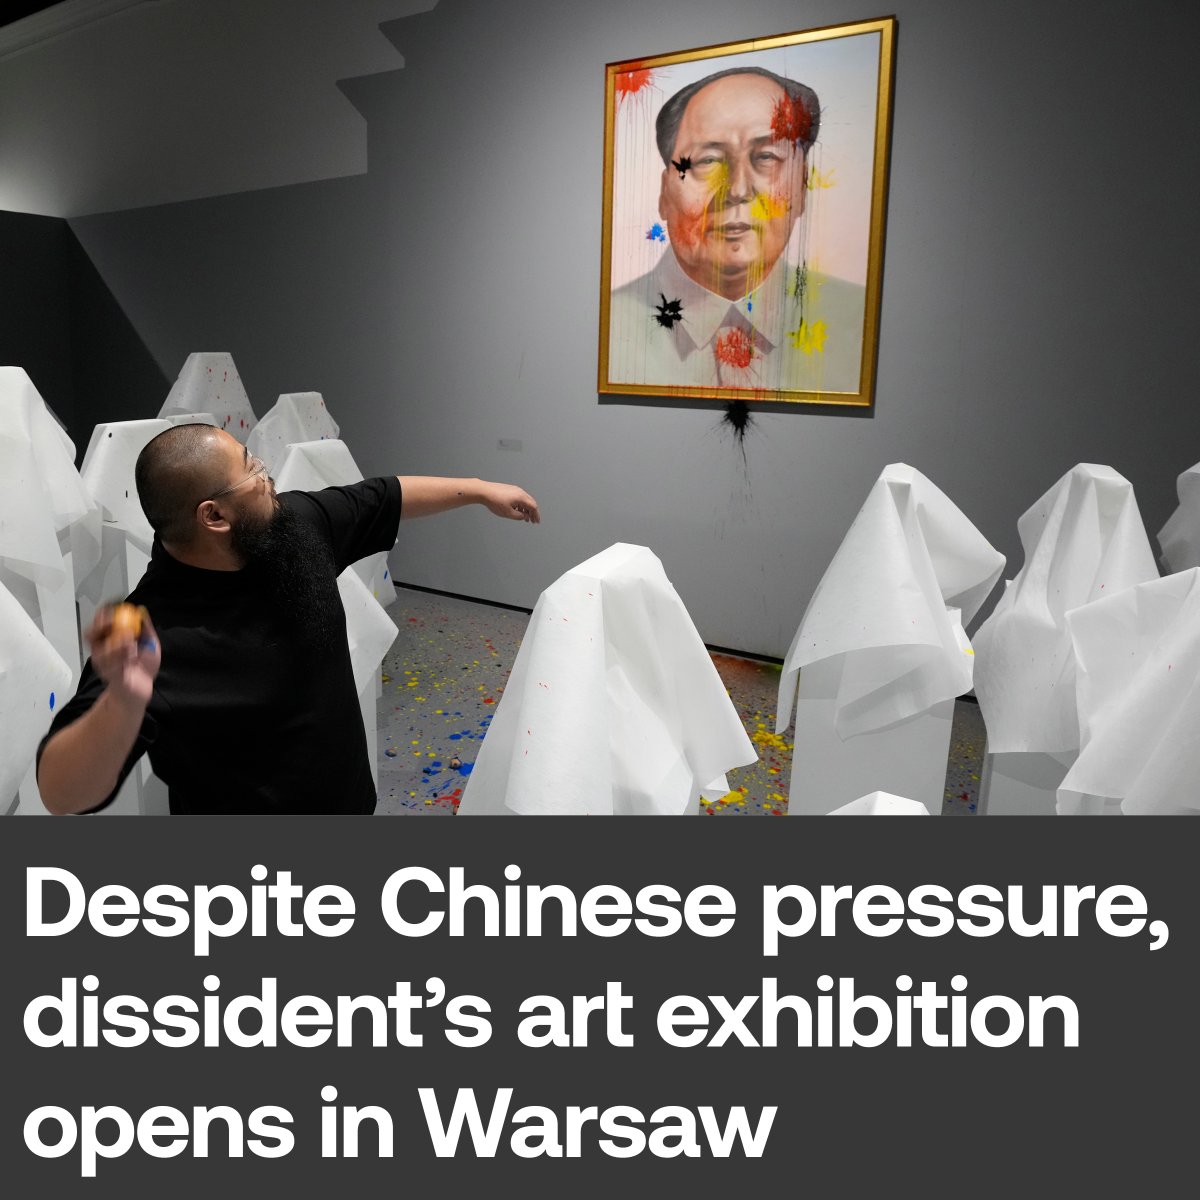 An exhibition by the Australia-based Chinese dissident artist Badiucao opened Friday at the Center for Contemporary Art in Warsaw, Poland.